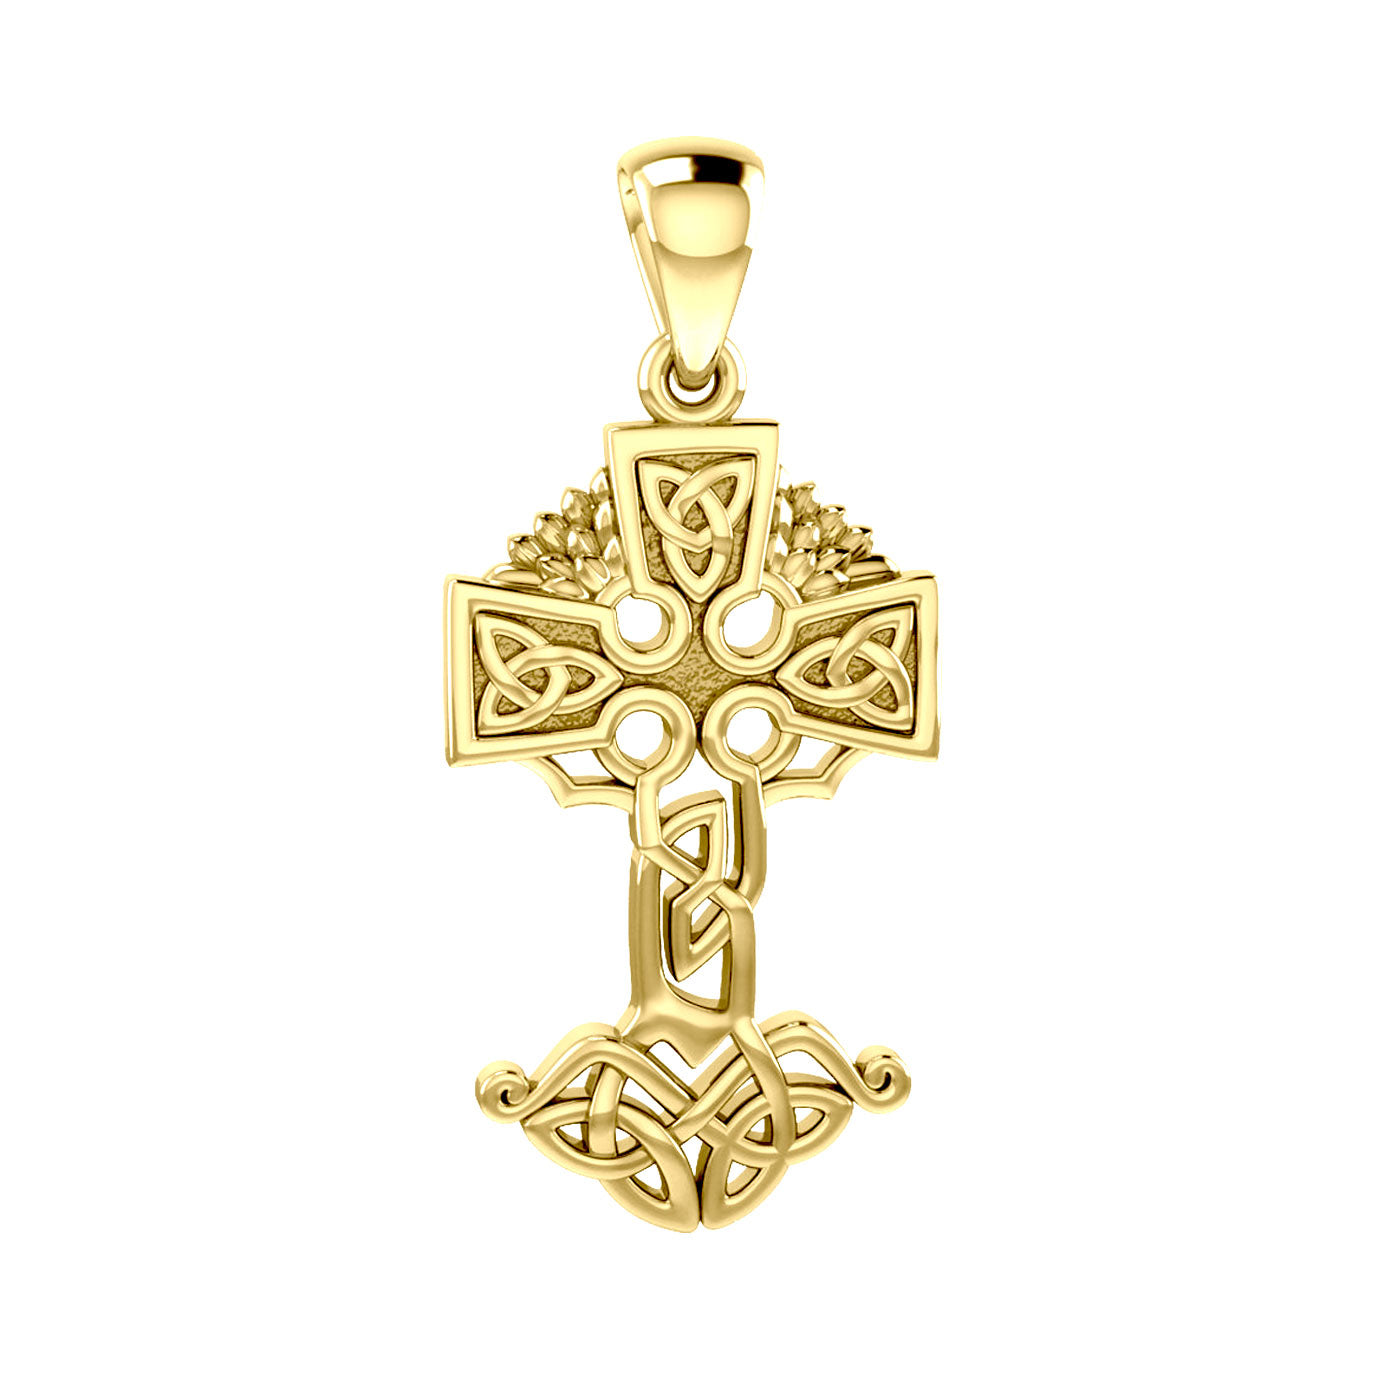 Gold Celtic Cross Necklace - YouTube